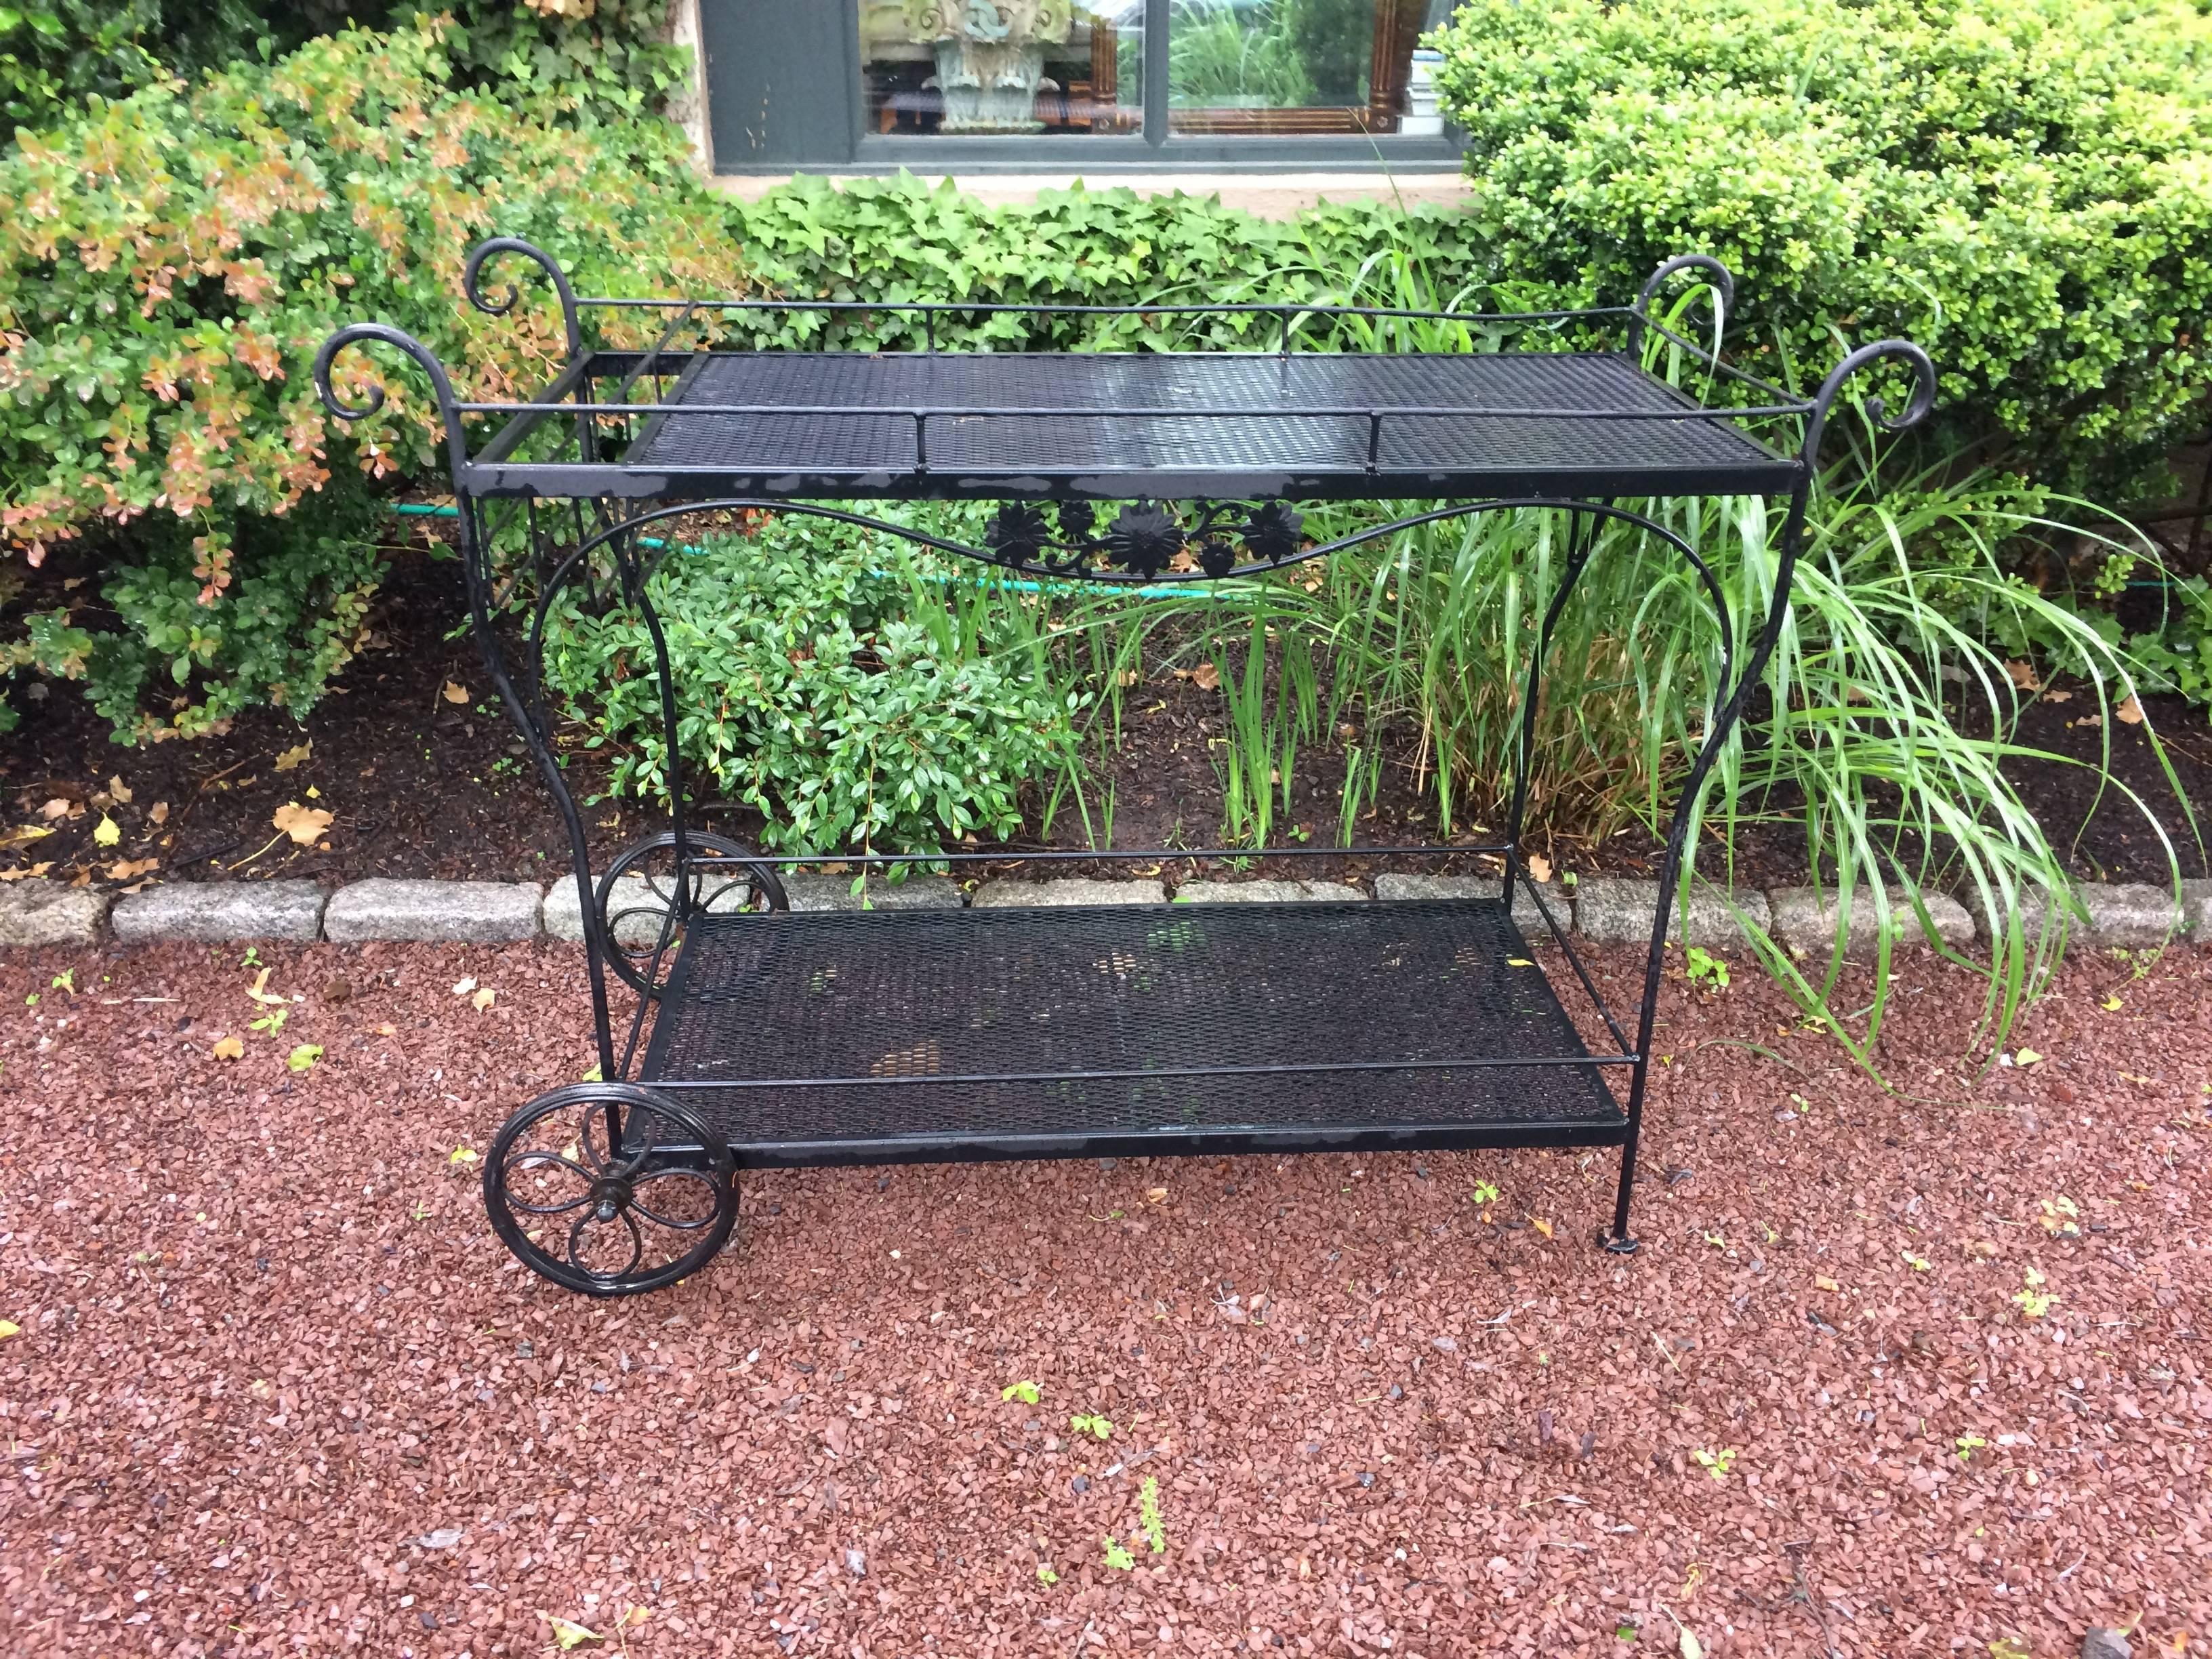 Classic black iron vintage Woodard bar cart having two tiers, a basket at the handle for liquor bottles and such, pretty wheels with daisy motife decoration within, and especially large size for entertaining at garden and POOL parties.